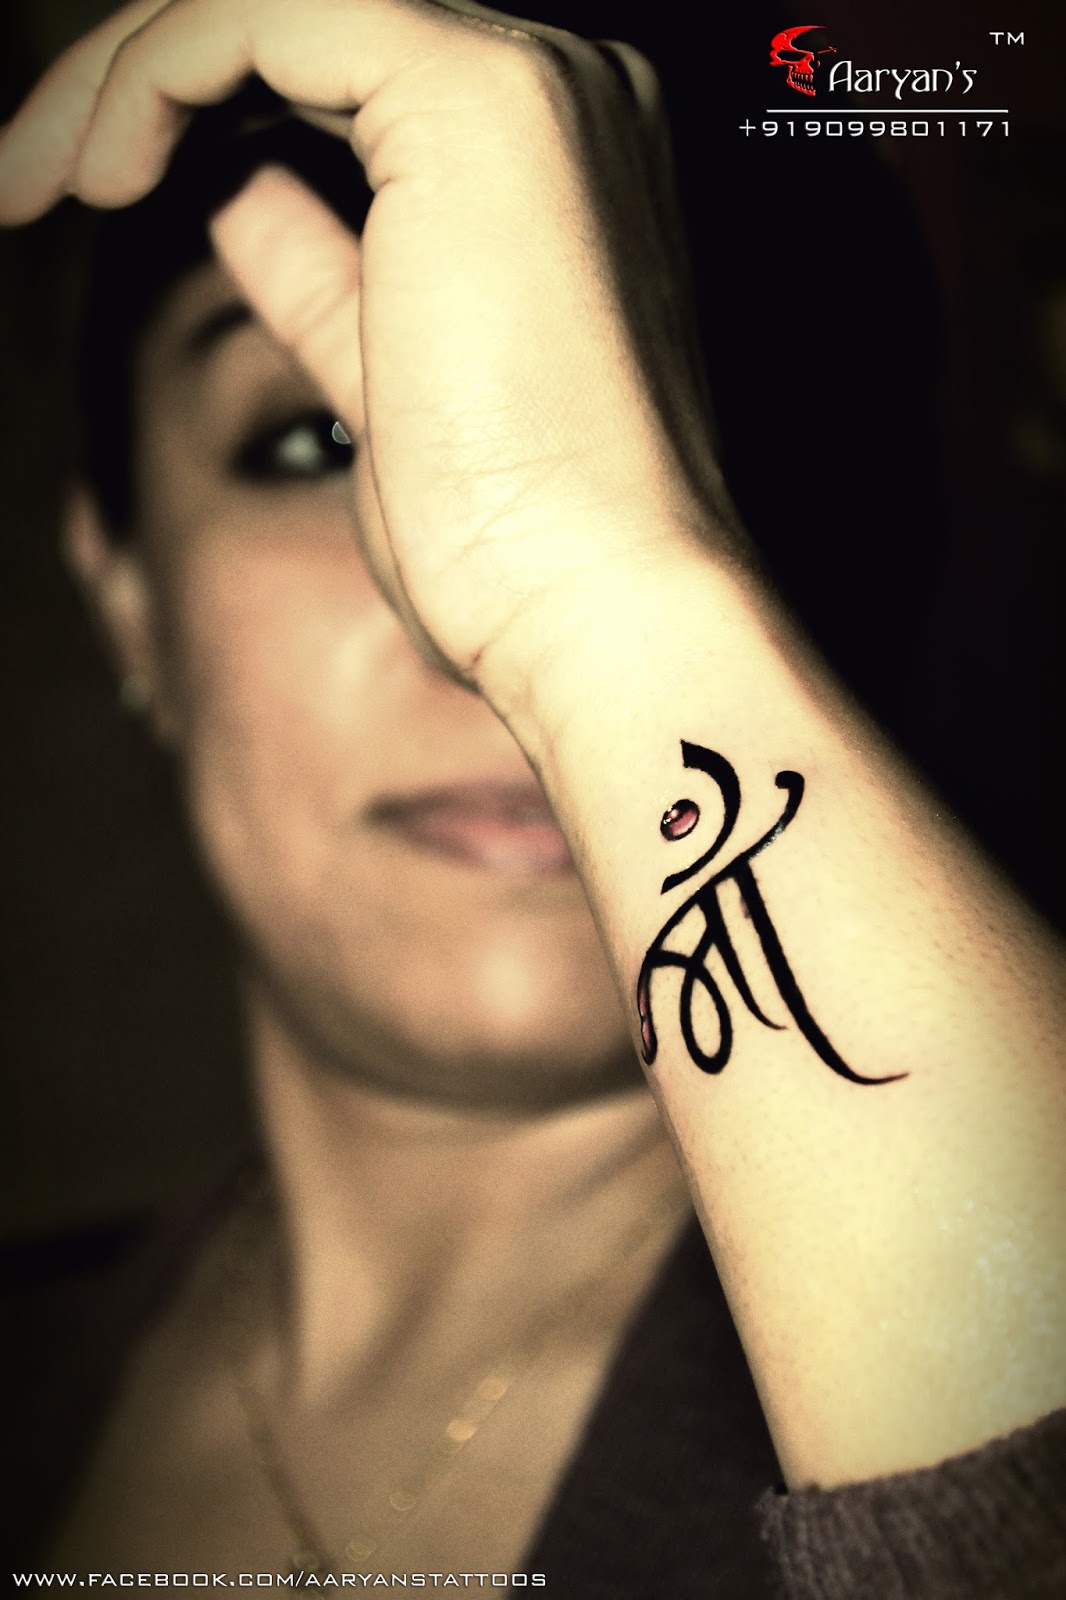 Mom Dad Tattoos: Awesome Tattoos for Mom-Dad by Aaryan ...